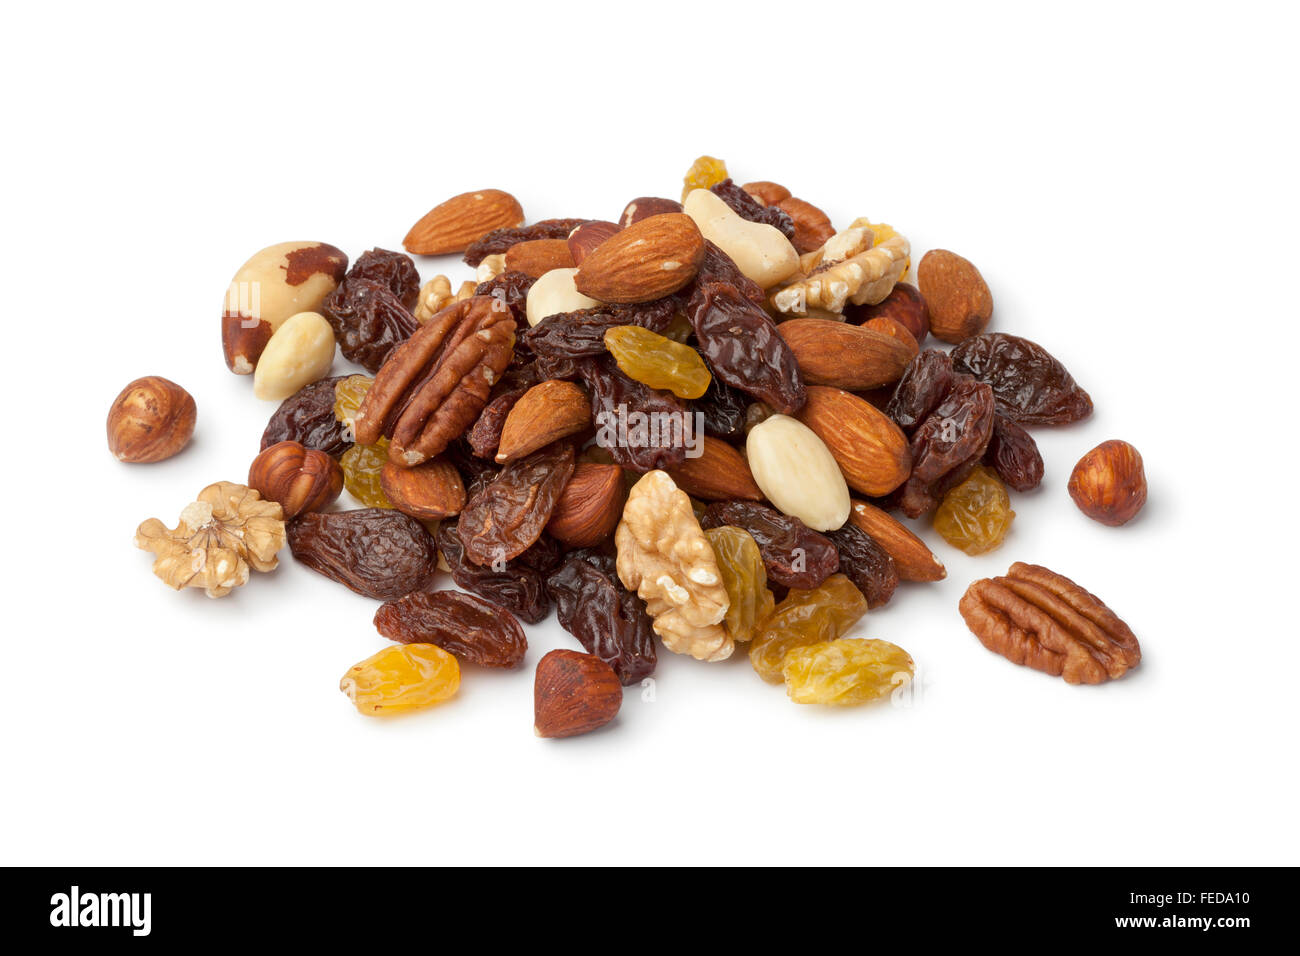 Heap of raisons and nuts on white background Stock Photo